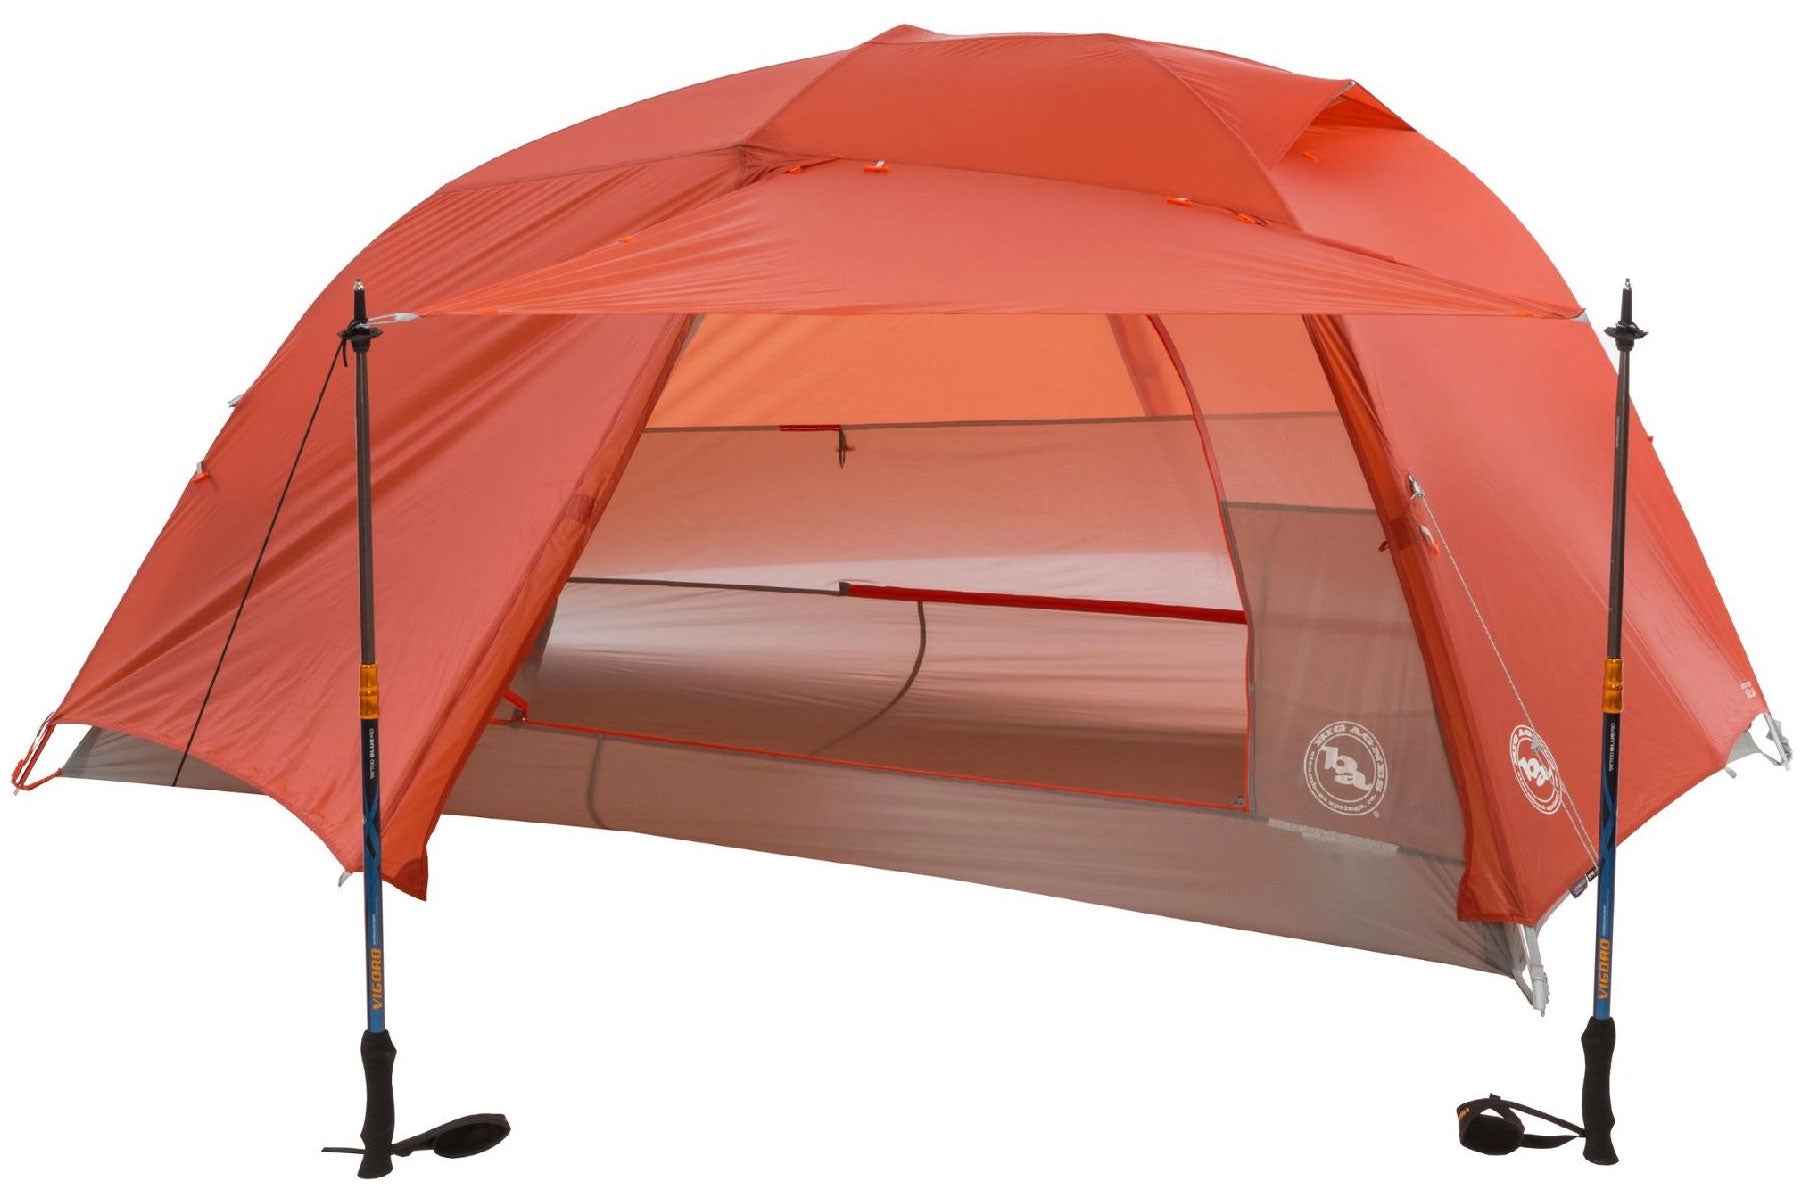 The Best Backpacking Tents of 2021